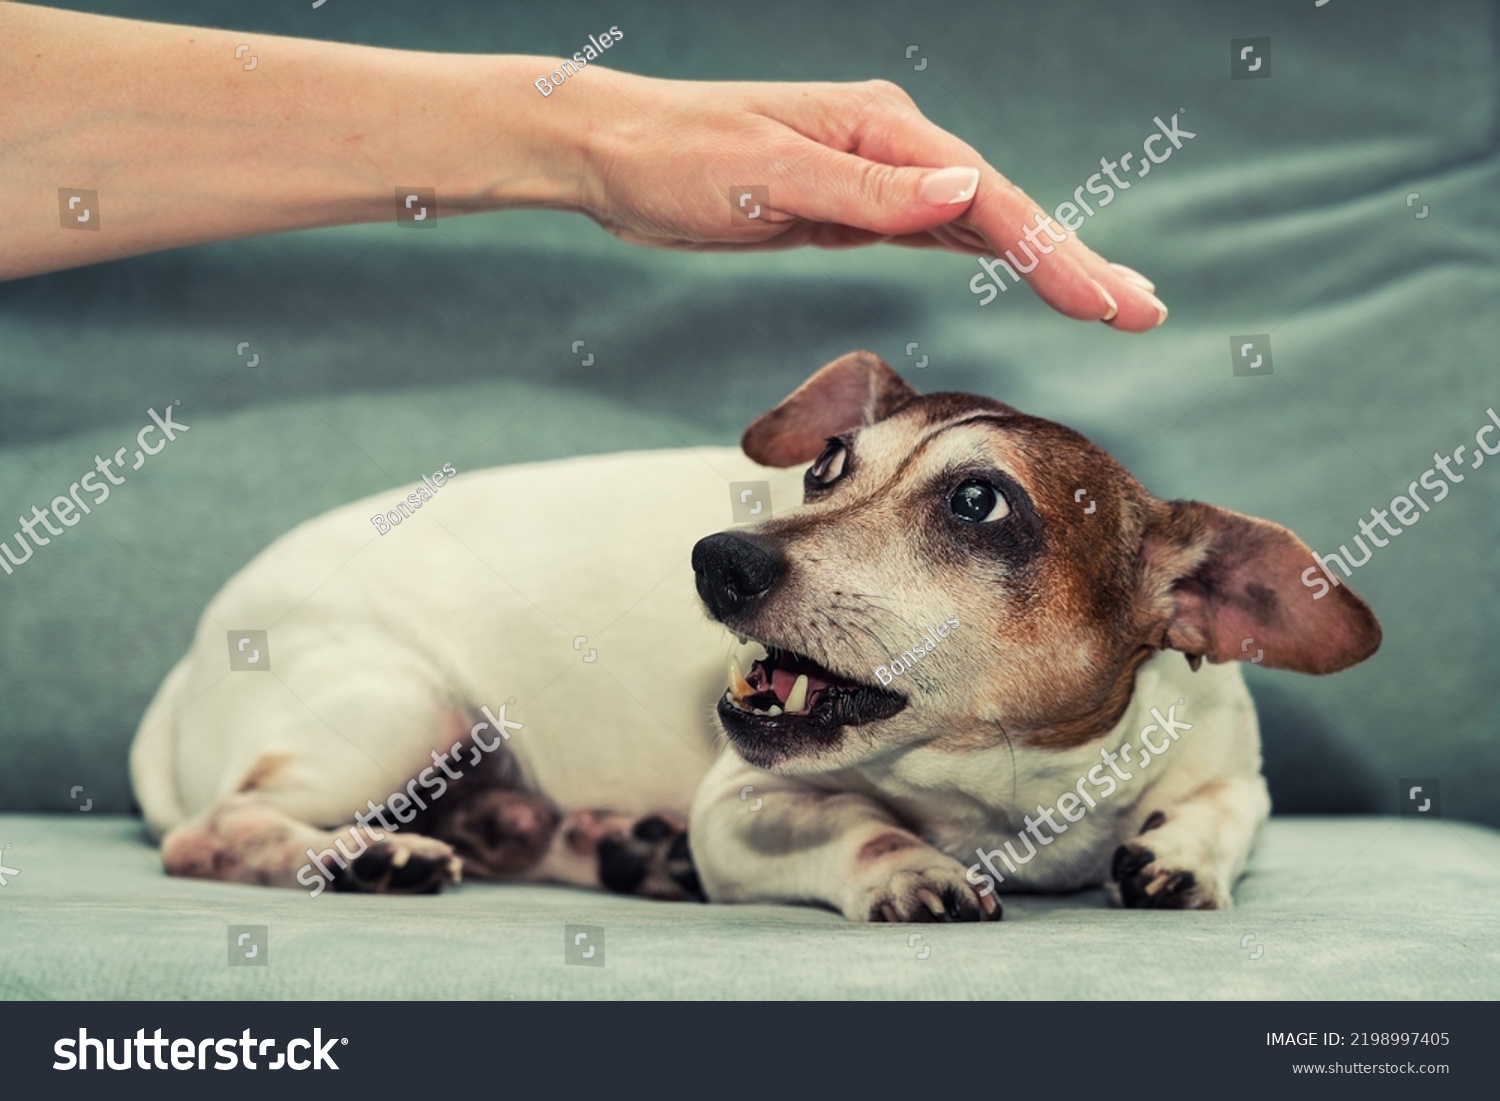 Pregnant female dog Jack Russell terrier growls to person hand. Animal instinct and behaviour. #2198997405